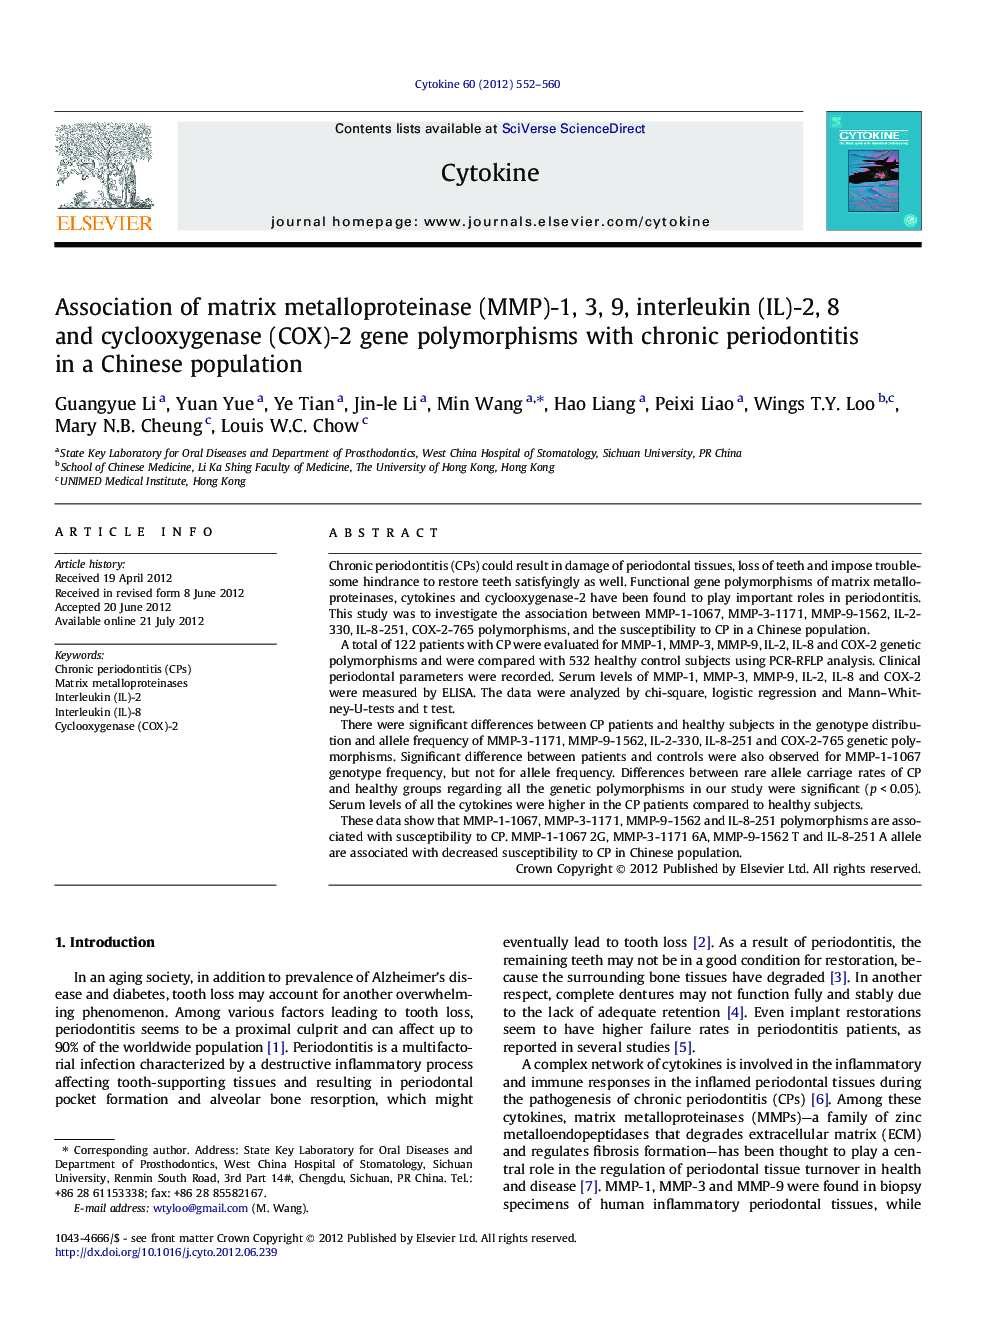 Association of matrix metalloproteinase (MMP)-1, 3, 9, interleukin (IL)-2, 8 and cyclooxygenase (COX)-2 gene polymorphisms with chronic periodontitis in a Chinese population